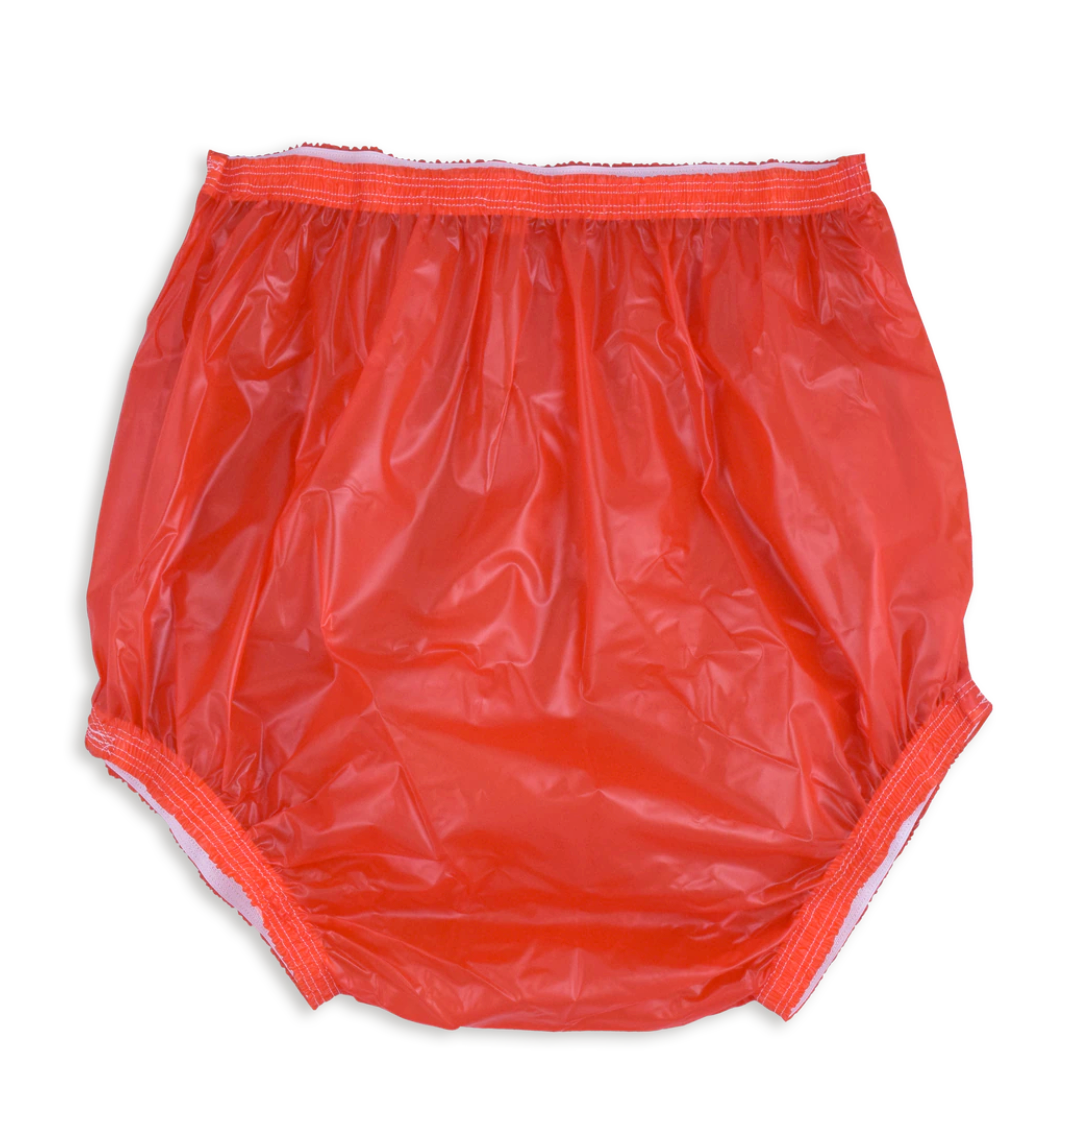 A pair of red Christy Plastic Pants.